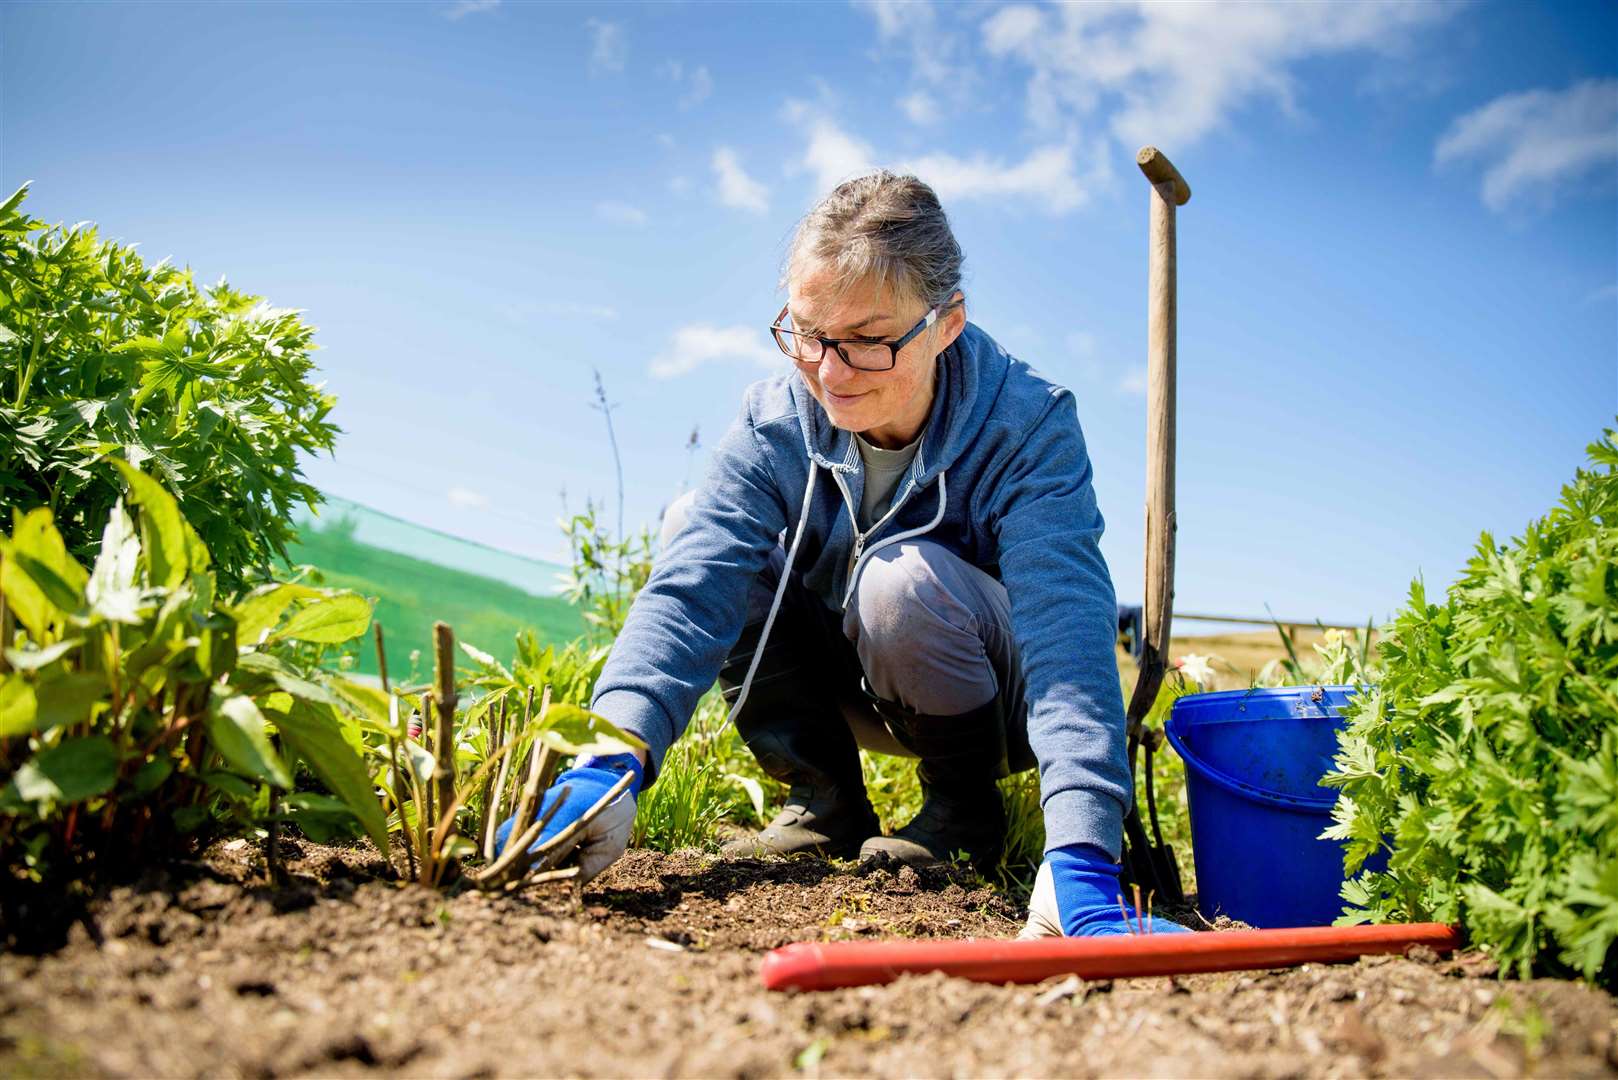 People with their own gardens and patios have fared better than those without personal outdoor space during the pandemic, the Covid-19 Health and Adherence Research in Scotland project has found.